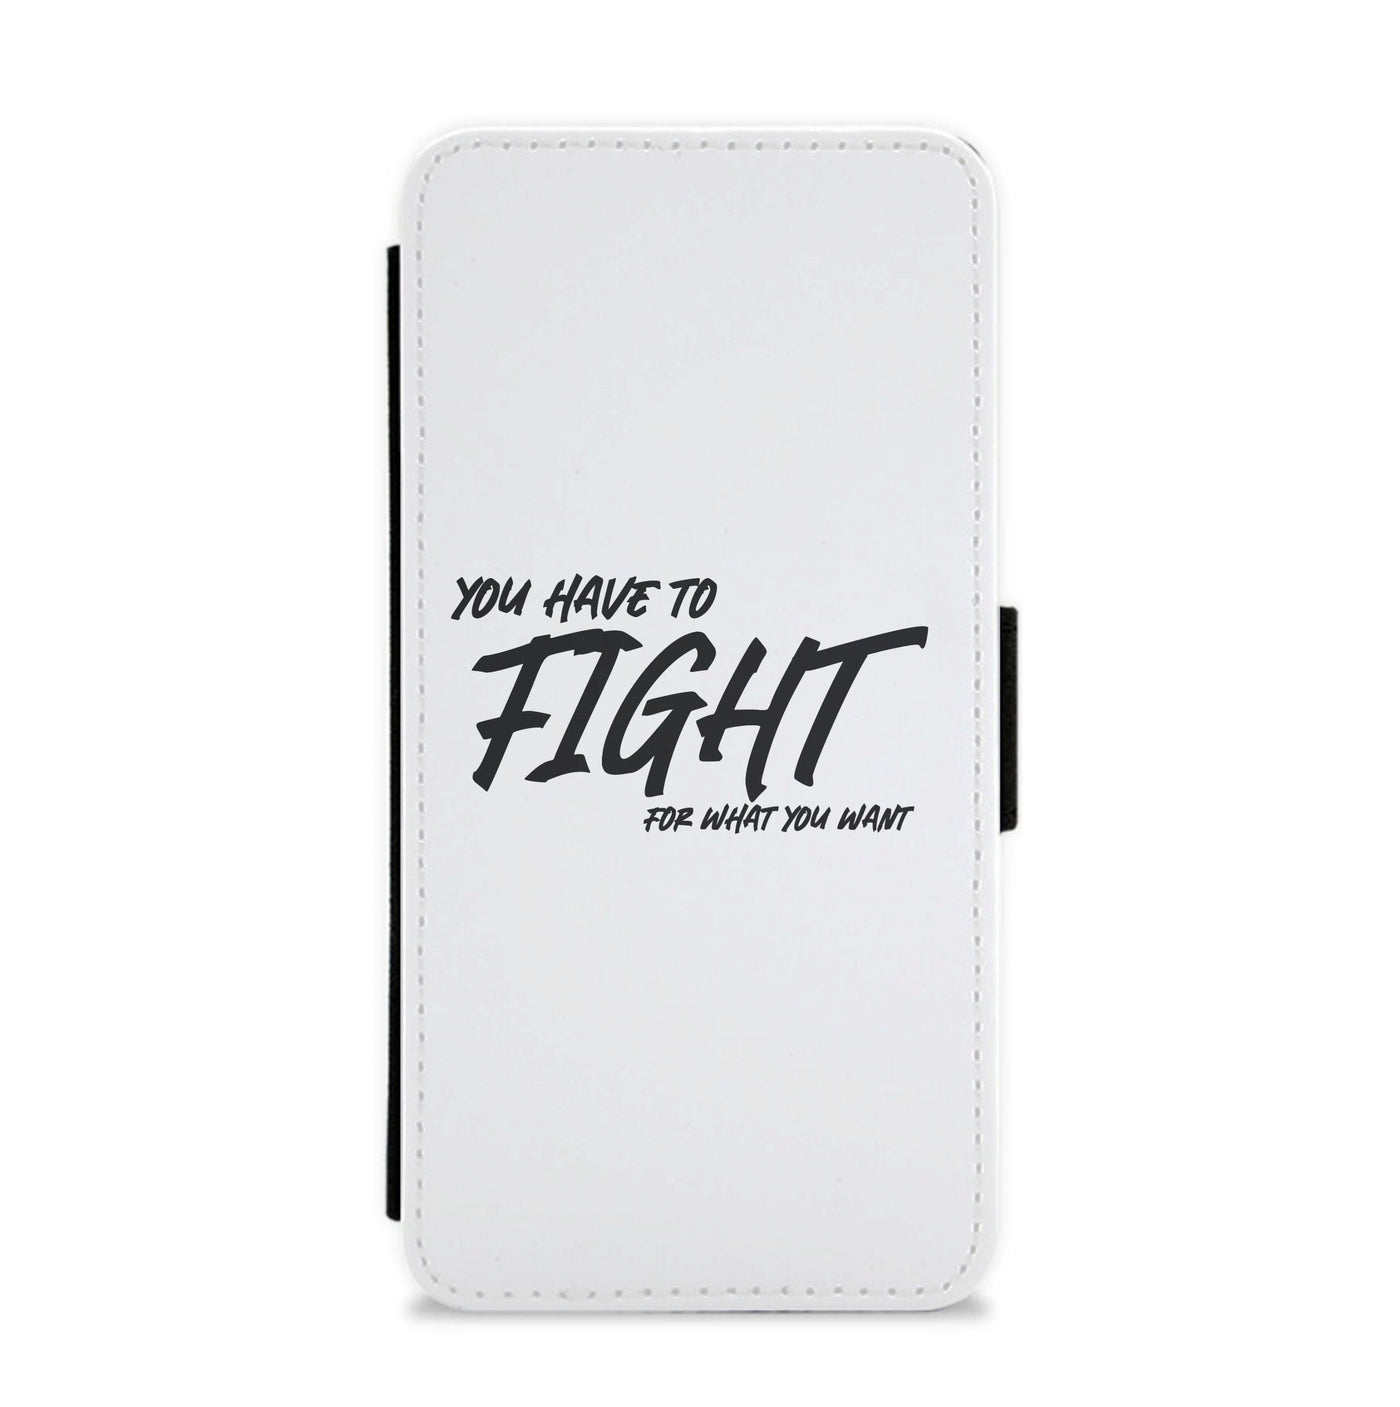 You Have To Fight - Top Boy Flip / Wallet Phone Case